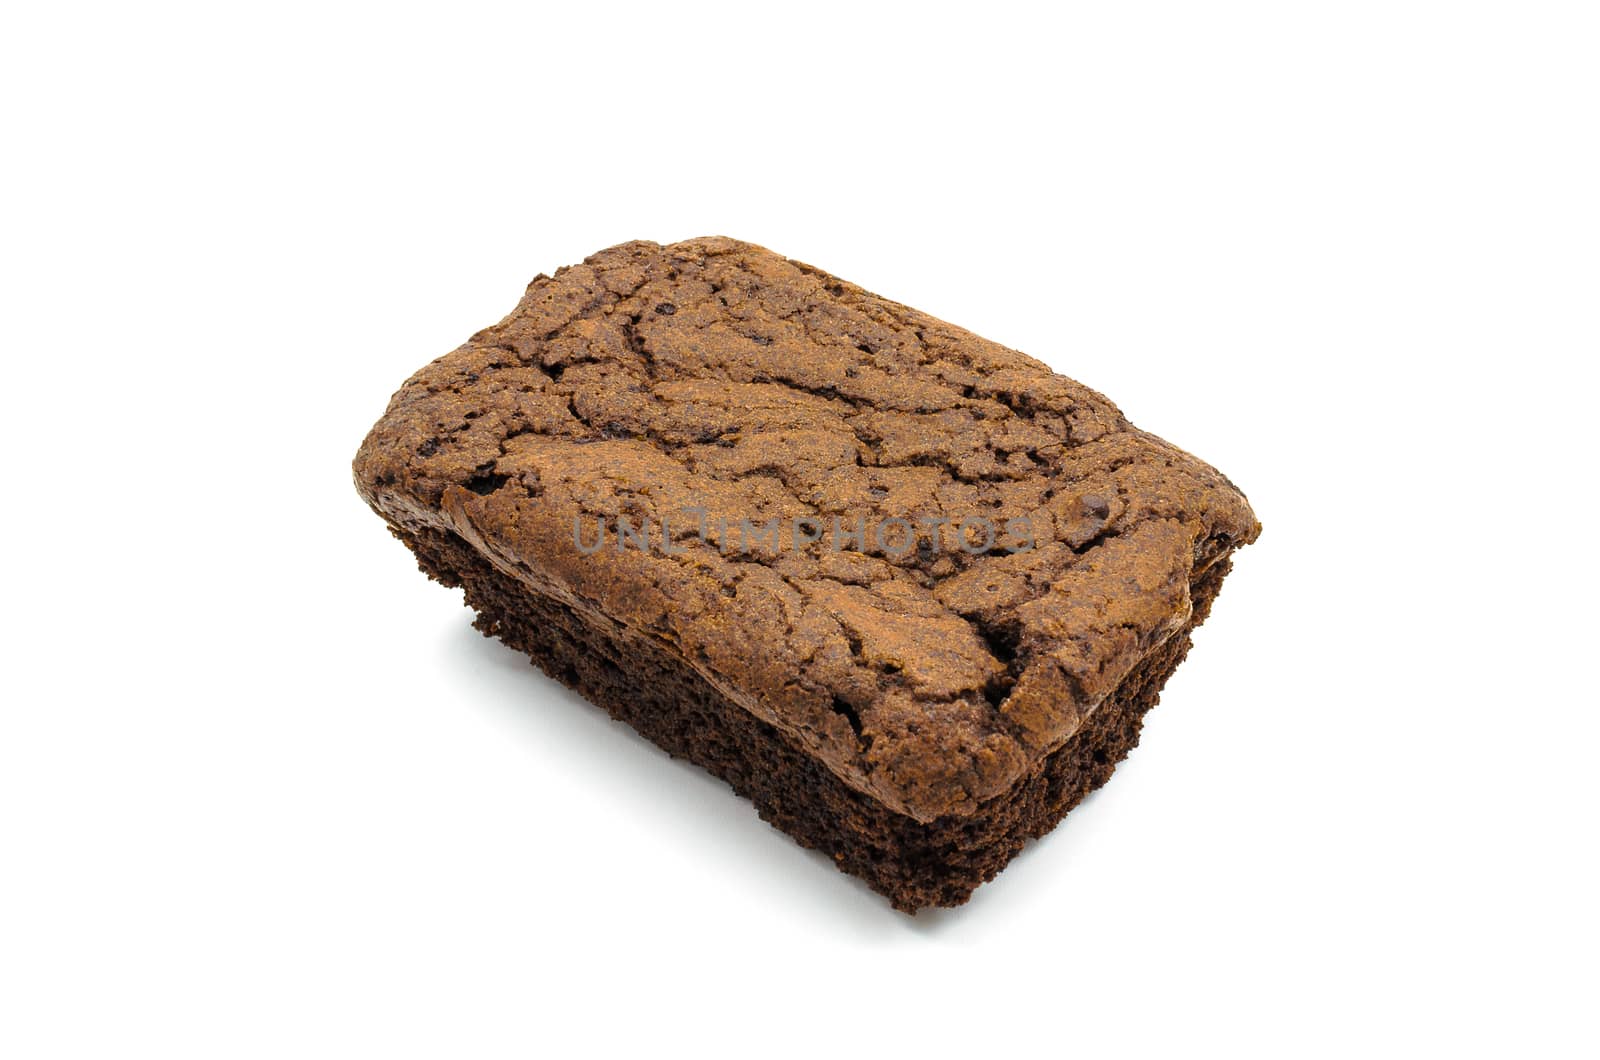 A Chocolate Brownie isolated on whtie background.